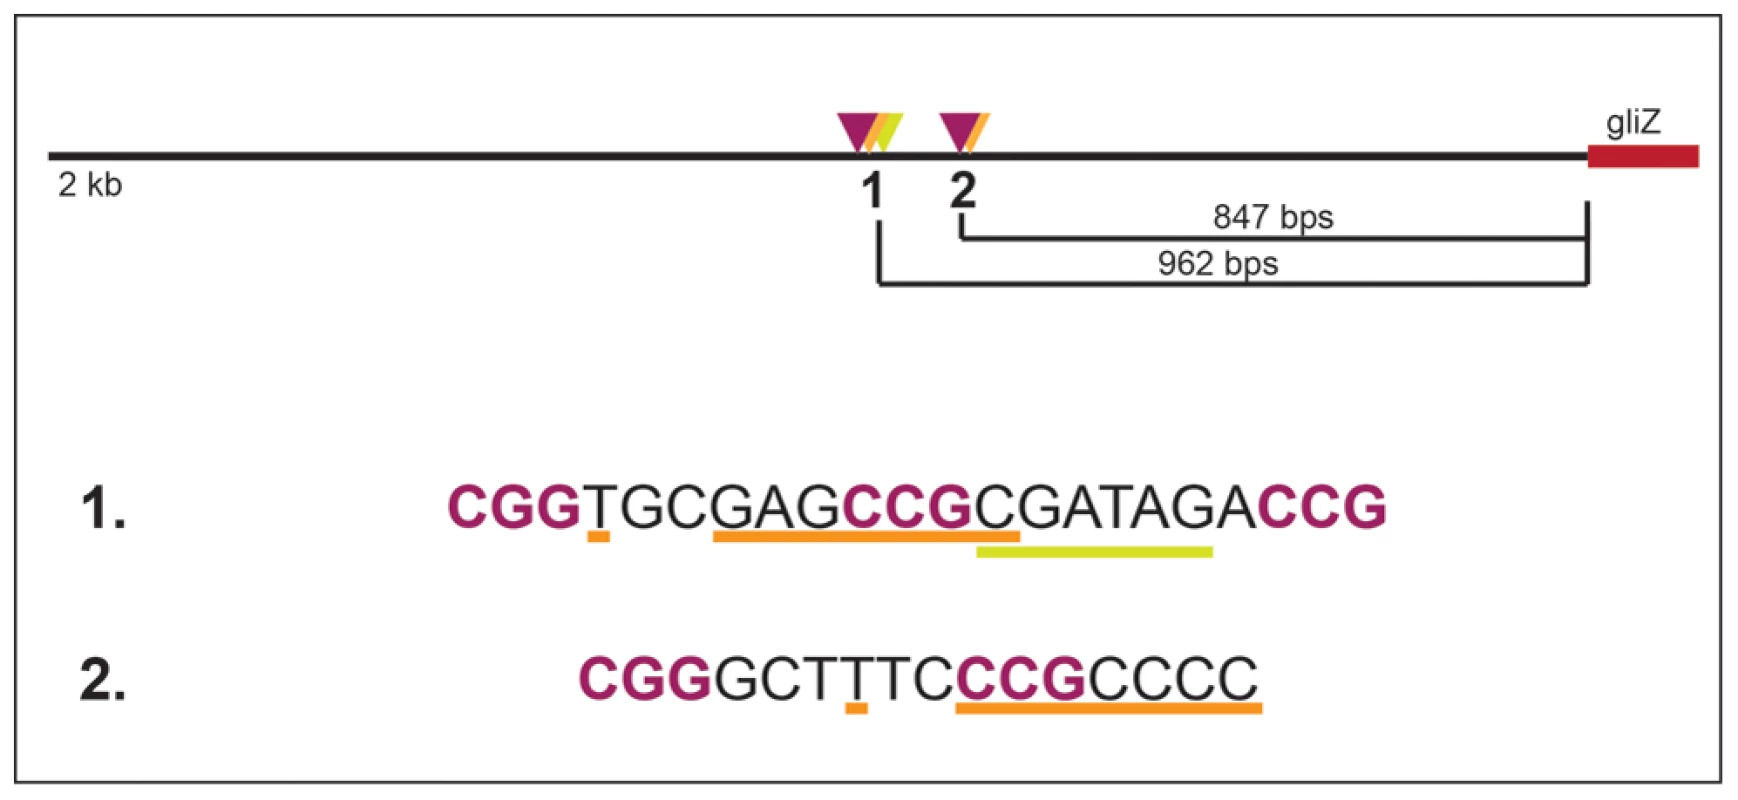 Layout of two potential GipA binding sites that are embedded in putative GliZ binding sites in the <i>gliZ</i> promoter.